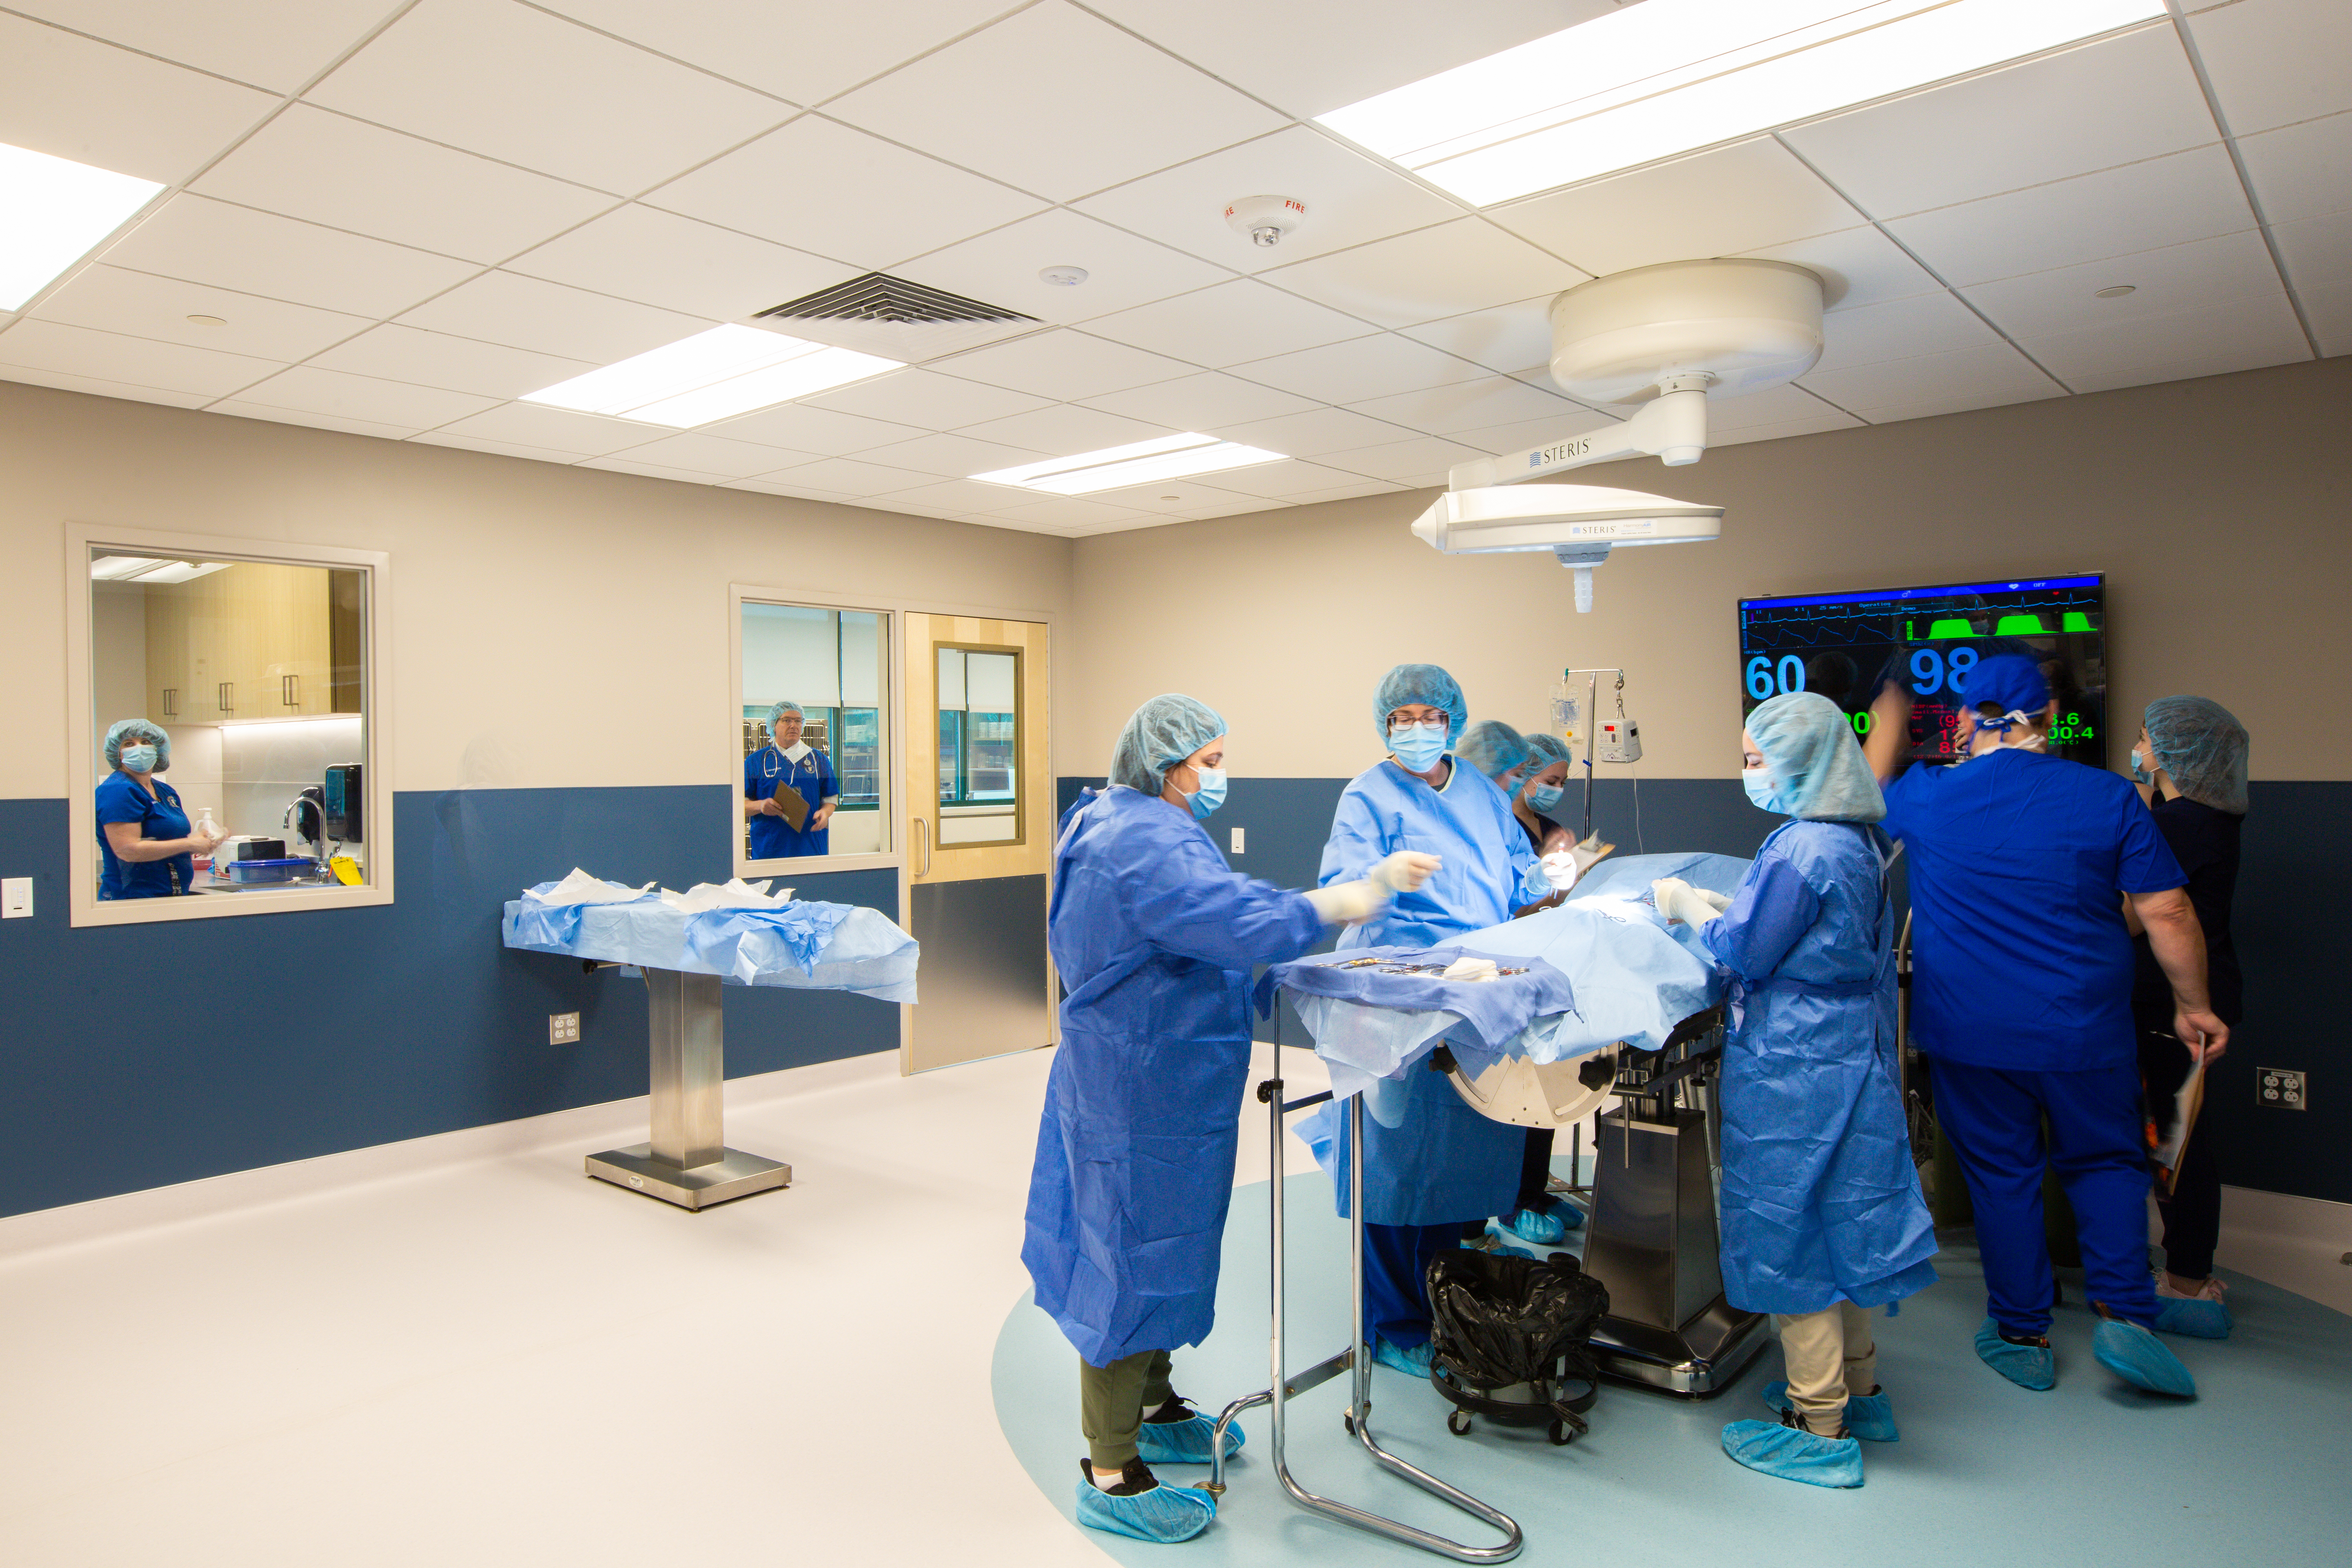 SURGICAL SUITES are part of the New England Institute of Technology's new 11,000-square-foot veterinary technology learning lab at the East Greenwich campus. / COURTESY NEW ENGLAND INSTITUTE OF TECHNOLOGY